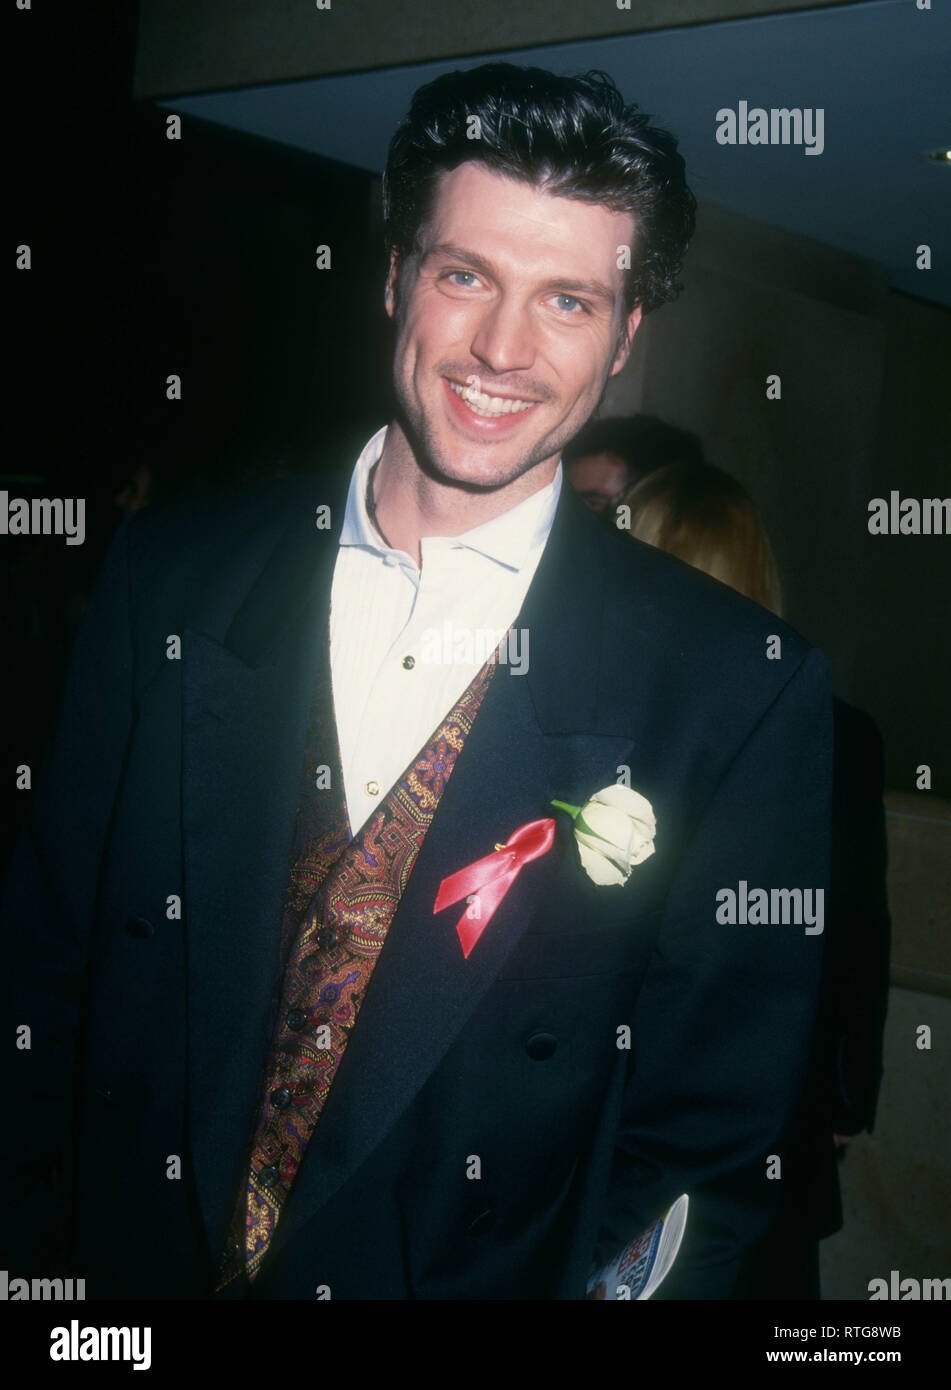 BEVERLY HILLS, CA - FEBRUARY 4: Actor Paolo Seganti attends the 10th Annual Soap Opera Digest Awards on February 4, 1994 at Beverly Hilton Hotel in Beverly Hills, California. Photo by Barry King/Alamy Stock Photo Stock Photo